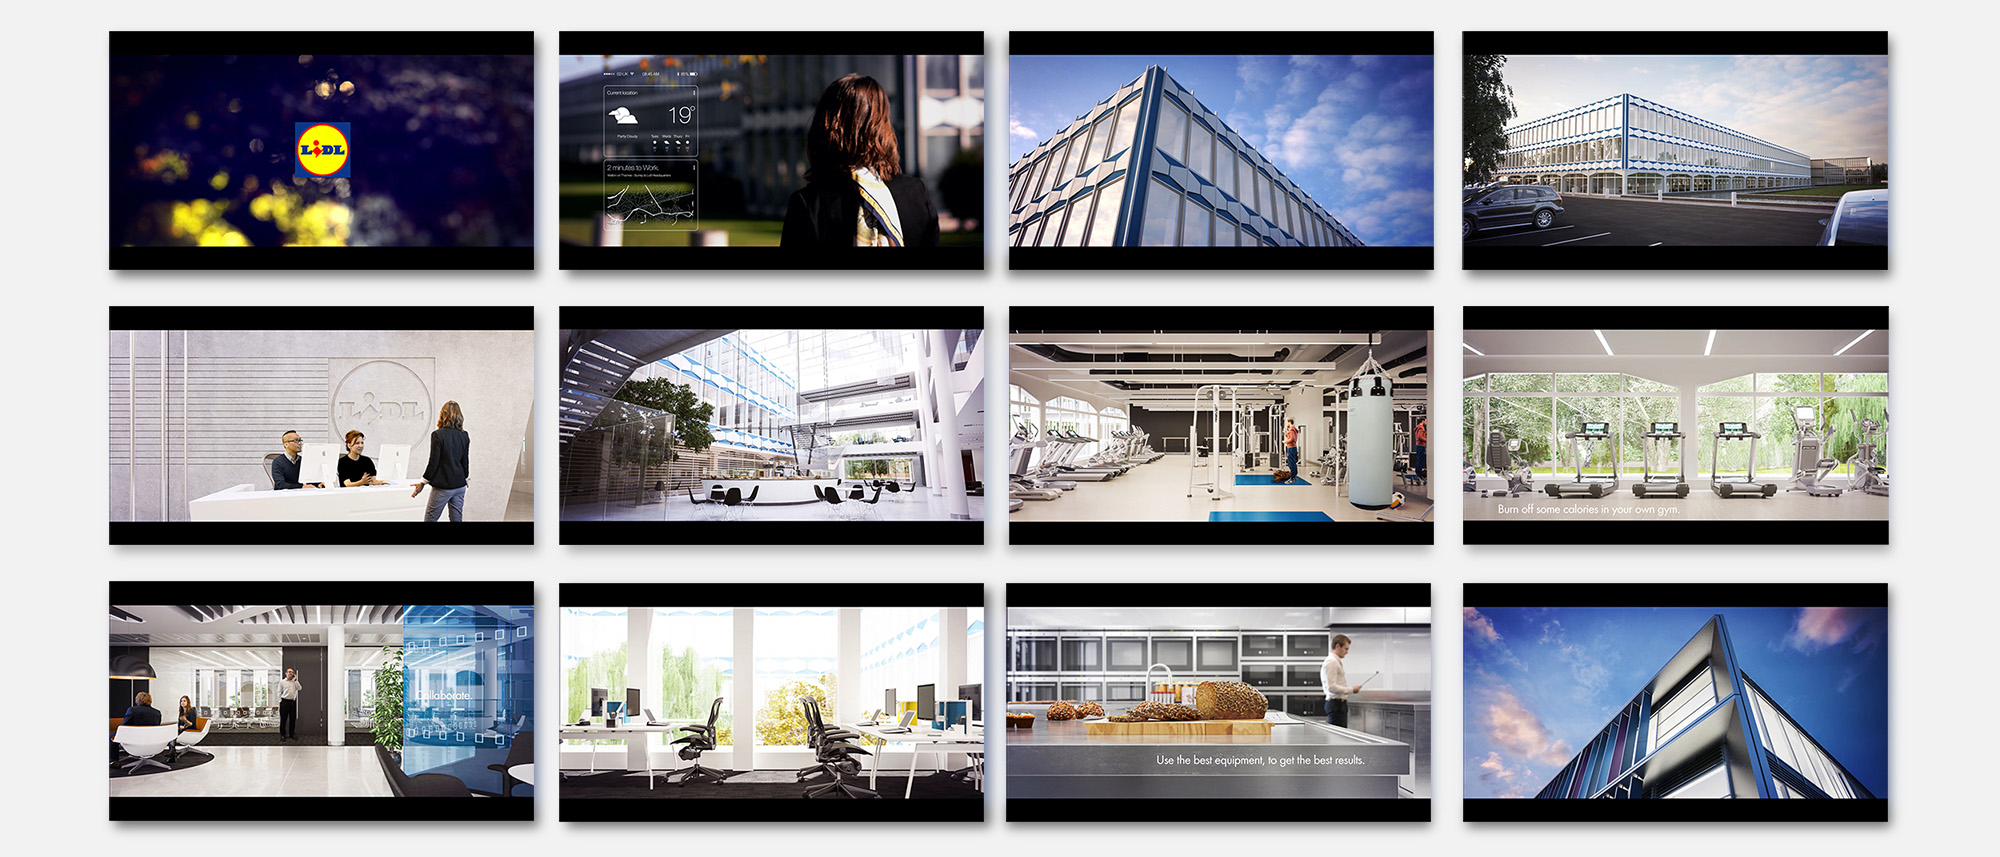 Stills from architectural services film showing a day in the life at an office